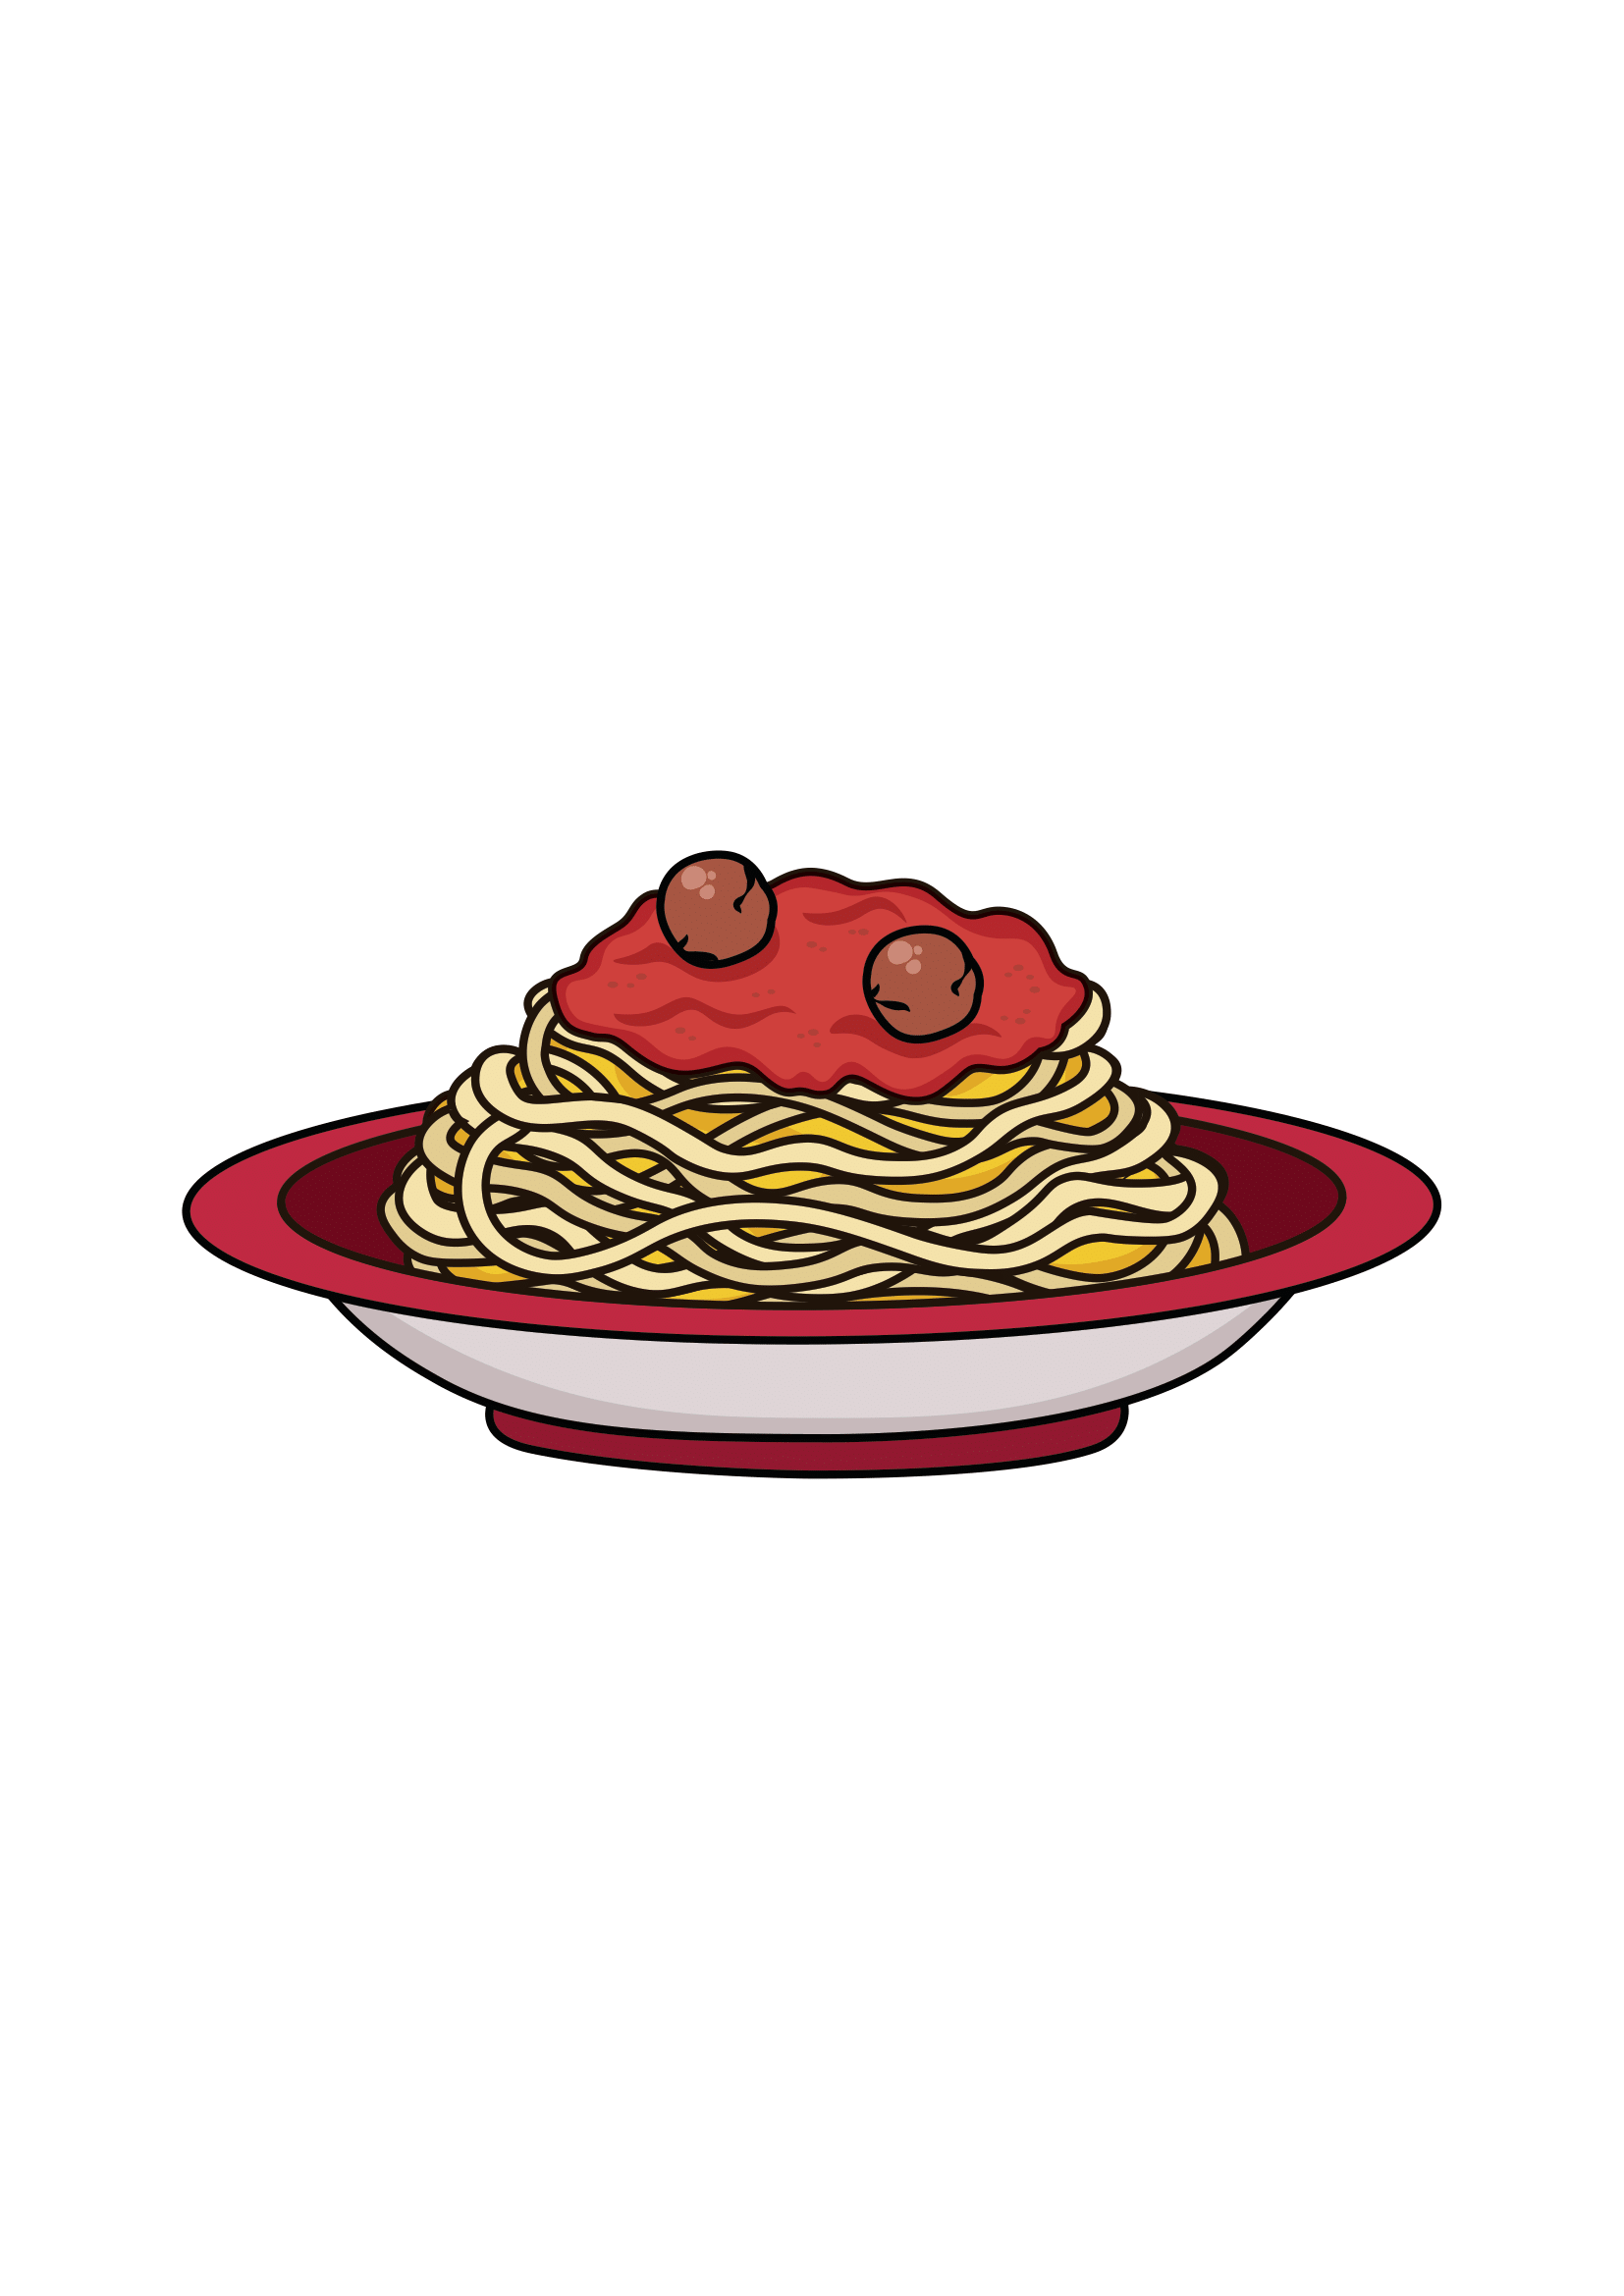 How to Draw Spaghetti And Meatballs Step by Step Printable